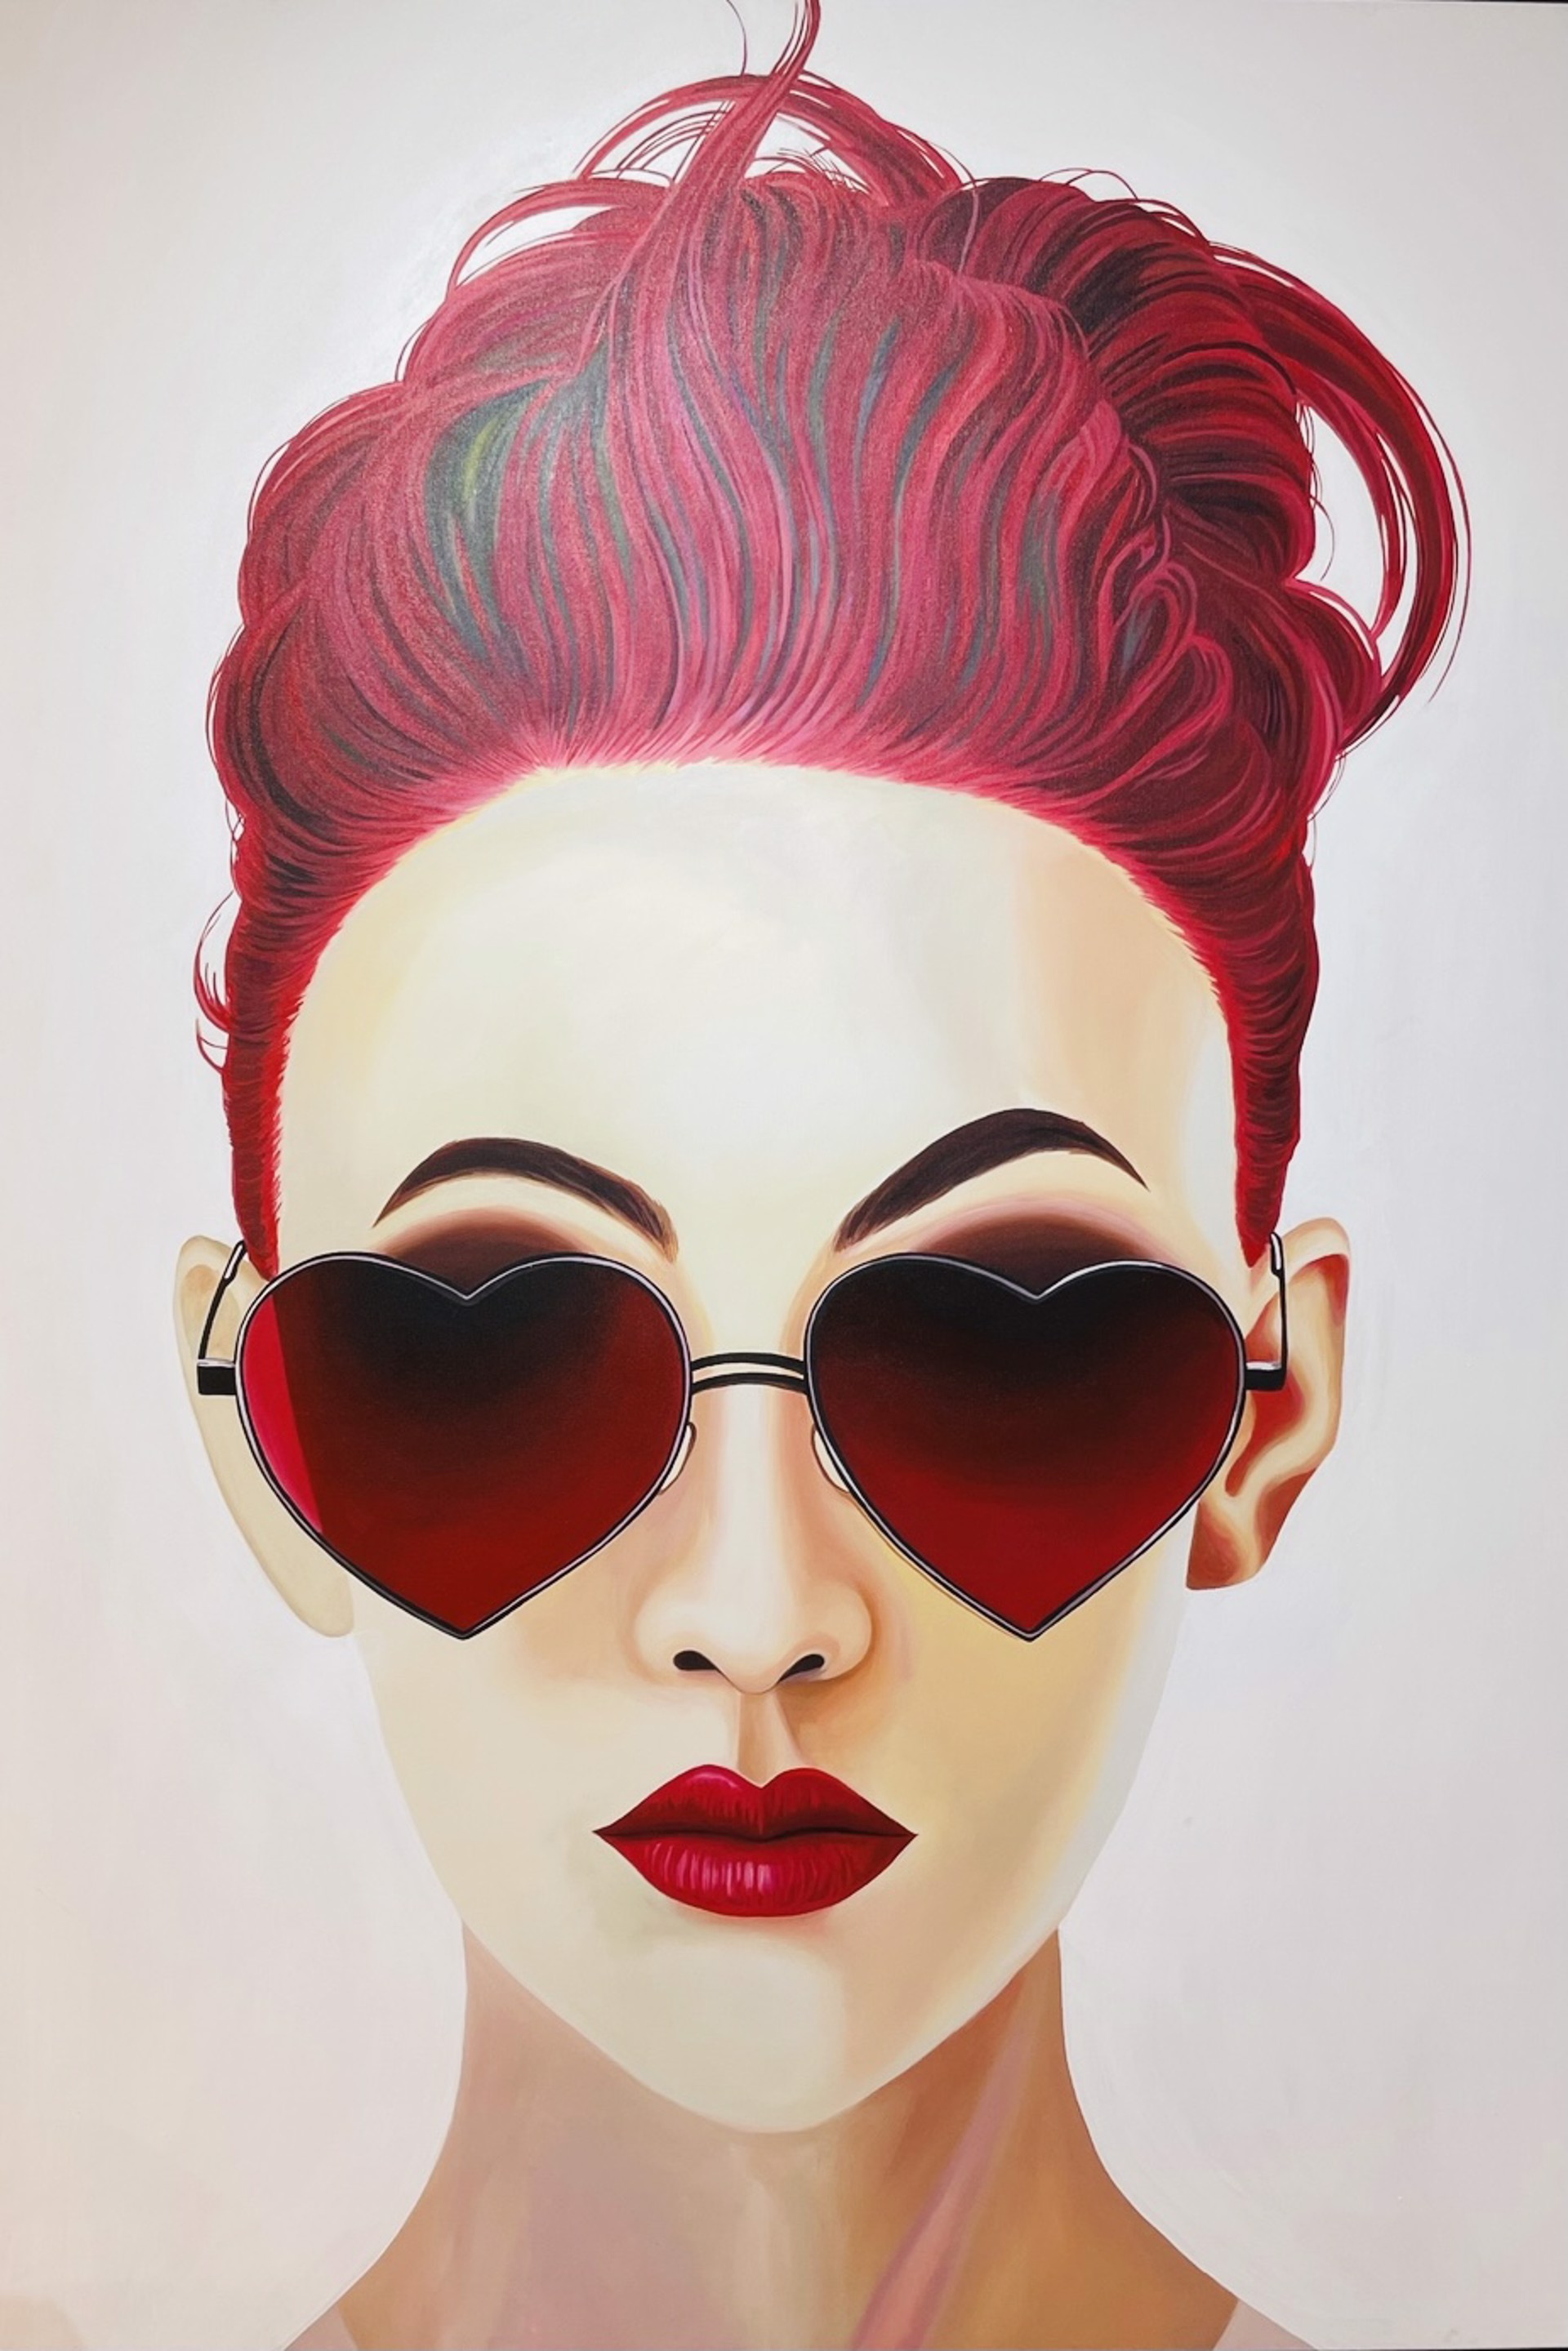 "Red Hearts Sunglasses" by Roni M